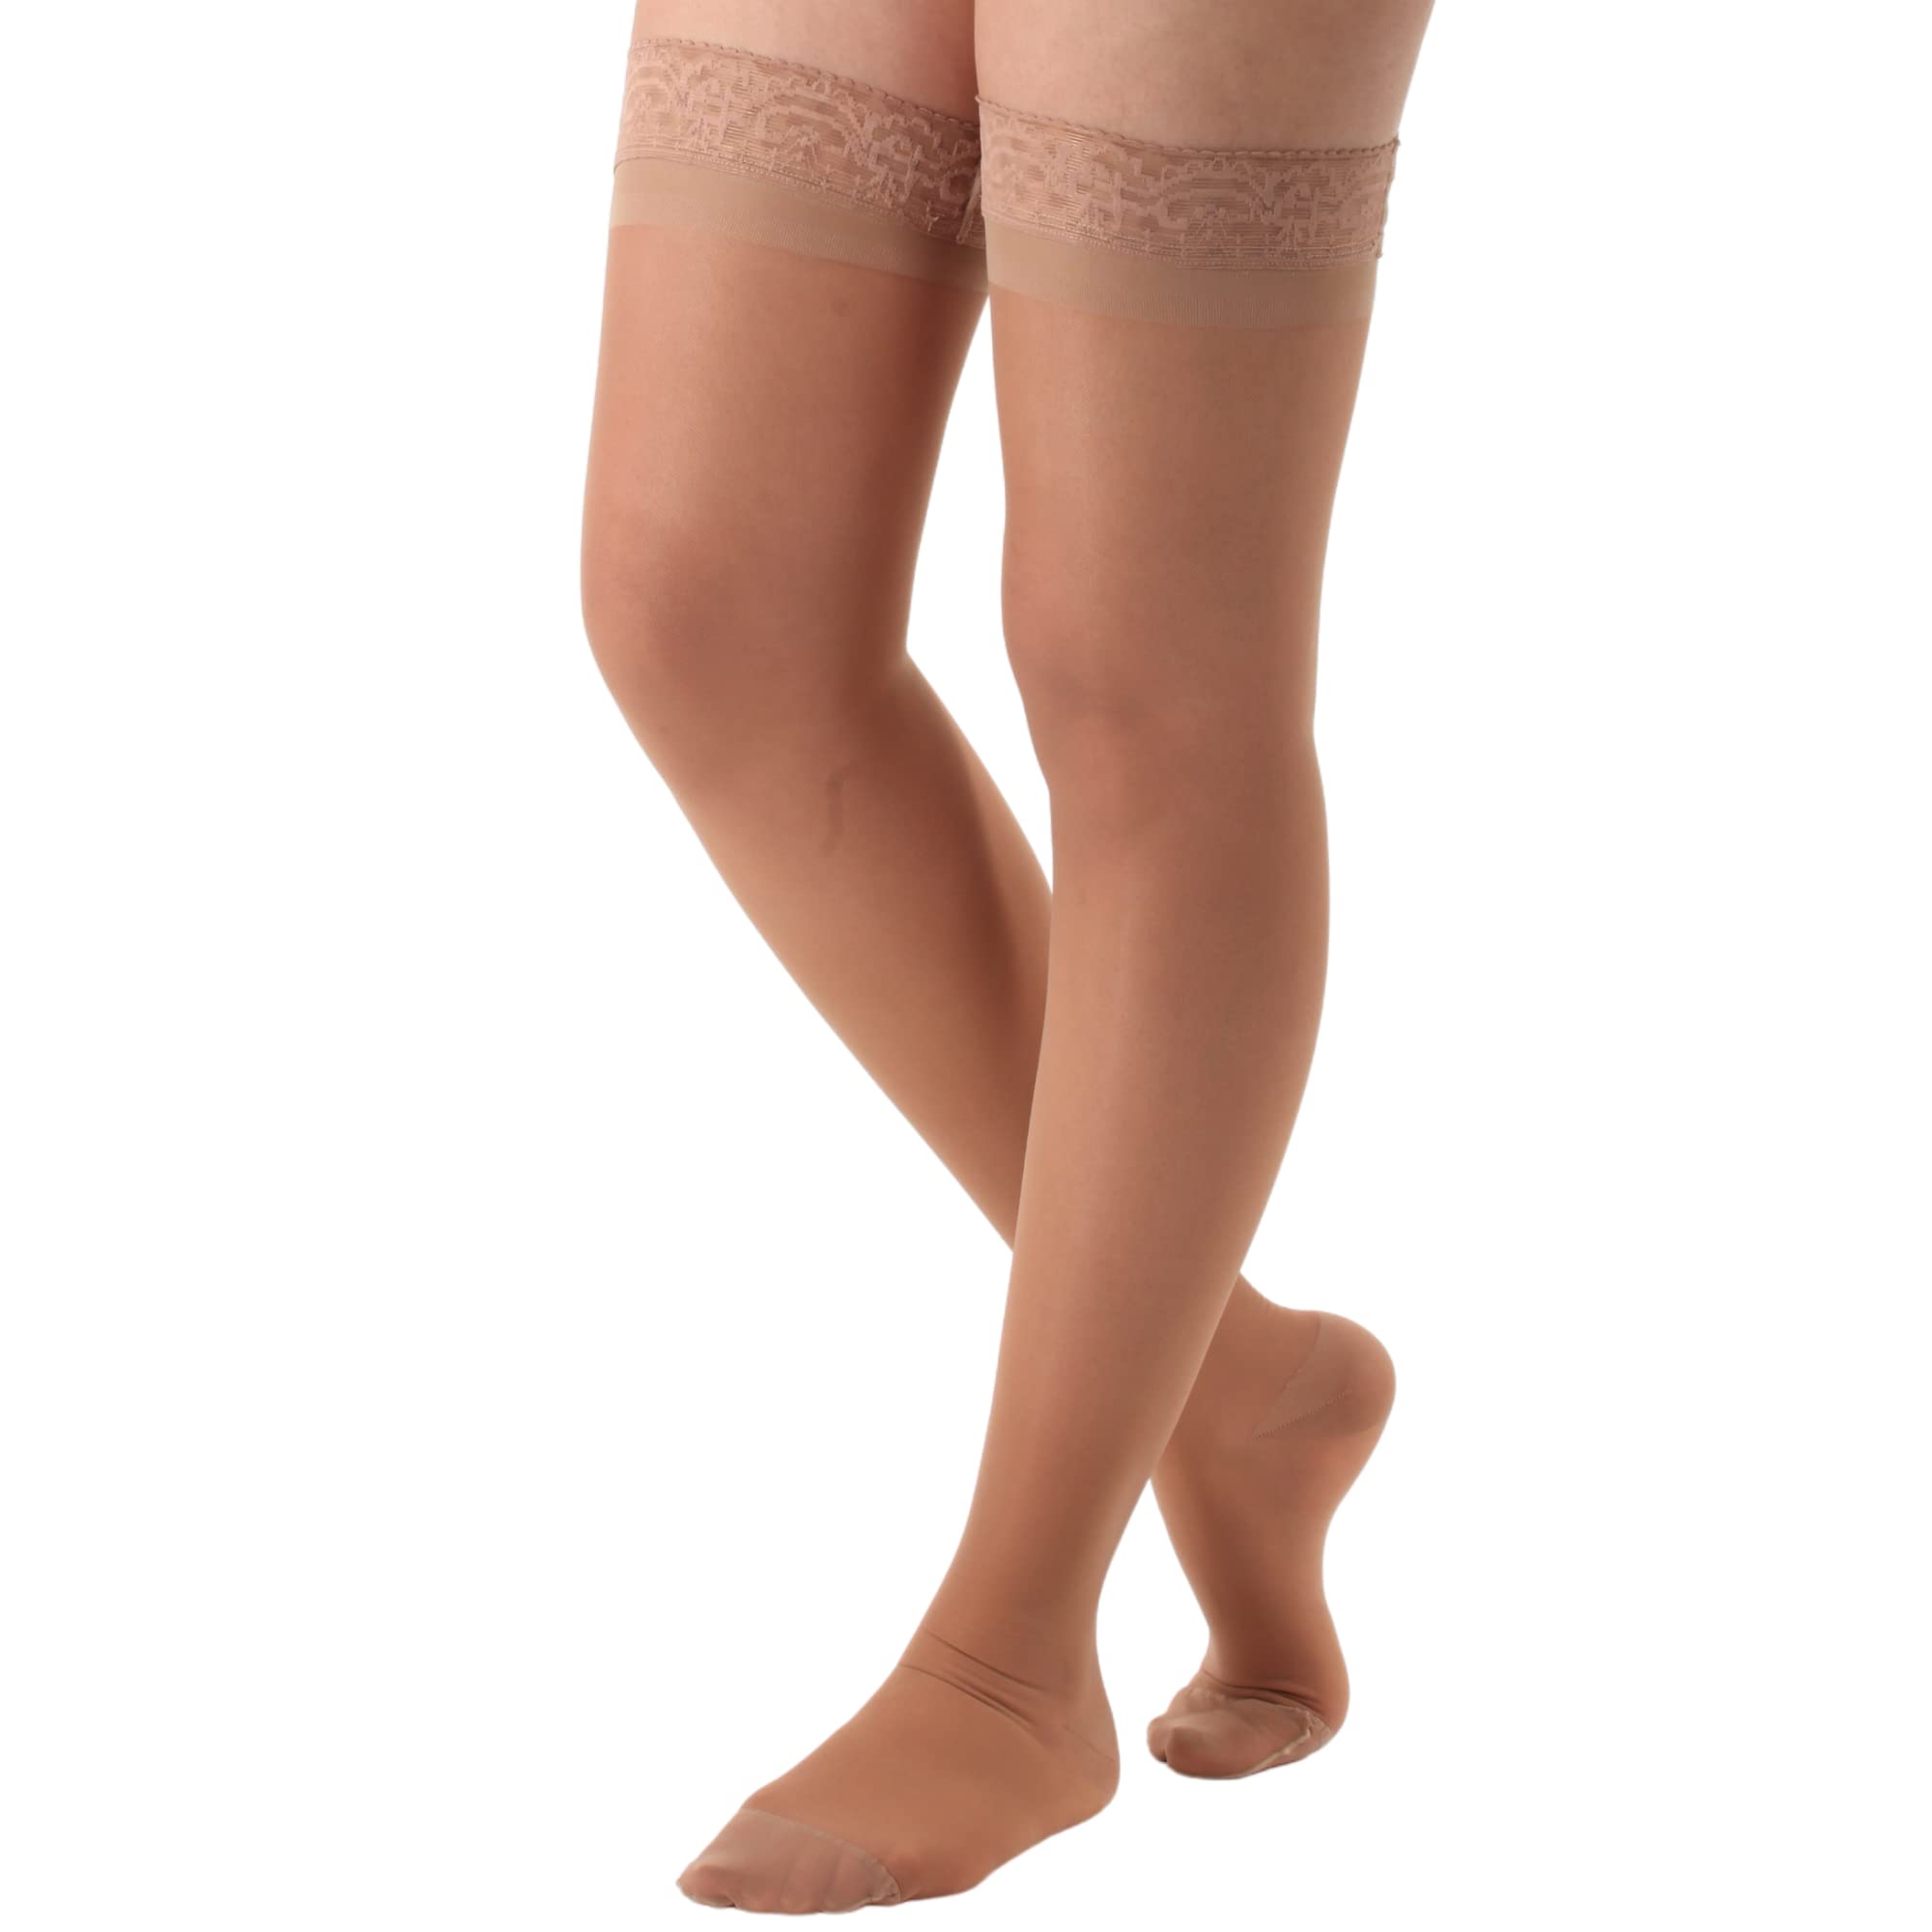 ABSOLUTE SUPPORT Made in USA - Plus Size Compression Stockings for Women  15-20mmHg - Womens Sheer Compression Thigh High with Silicone Border for